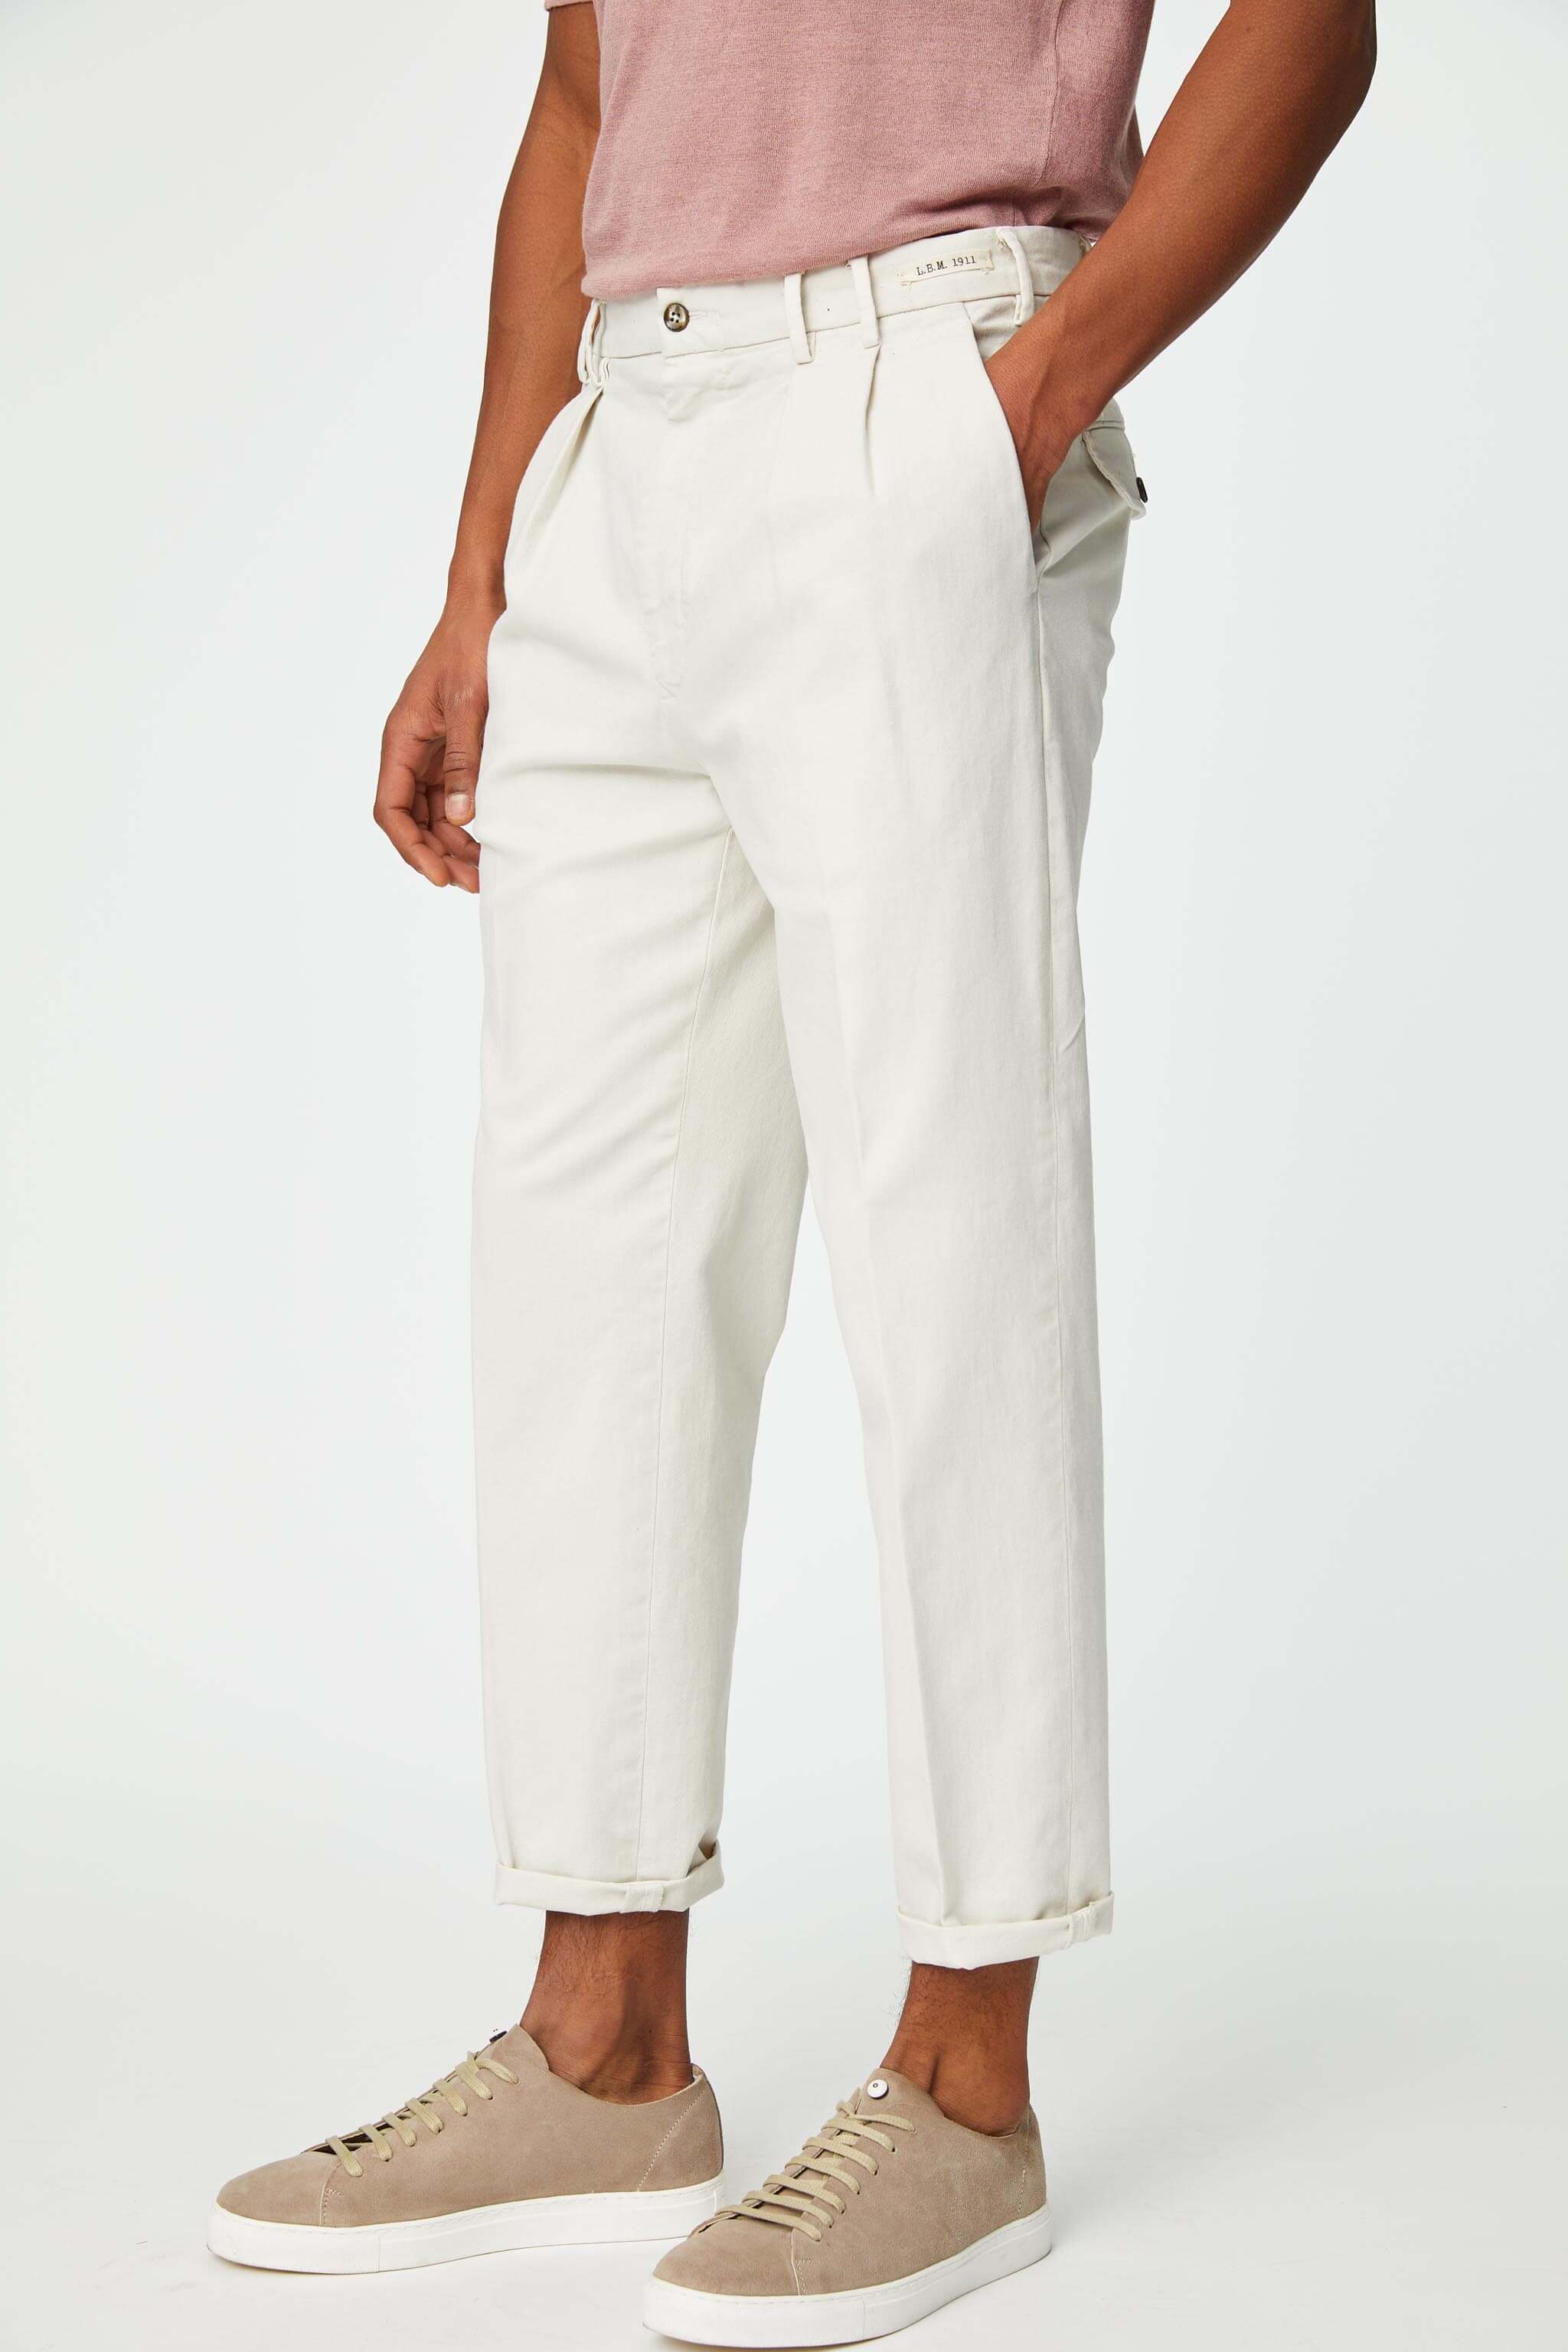 Garment-dyed CHARLIE pants in white